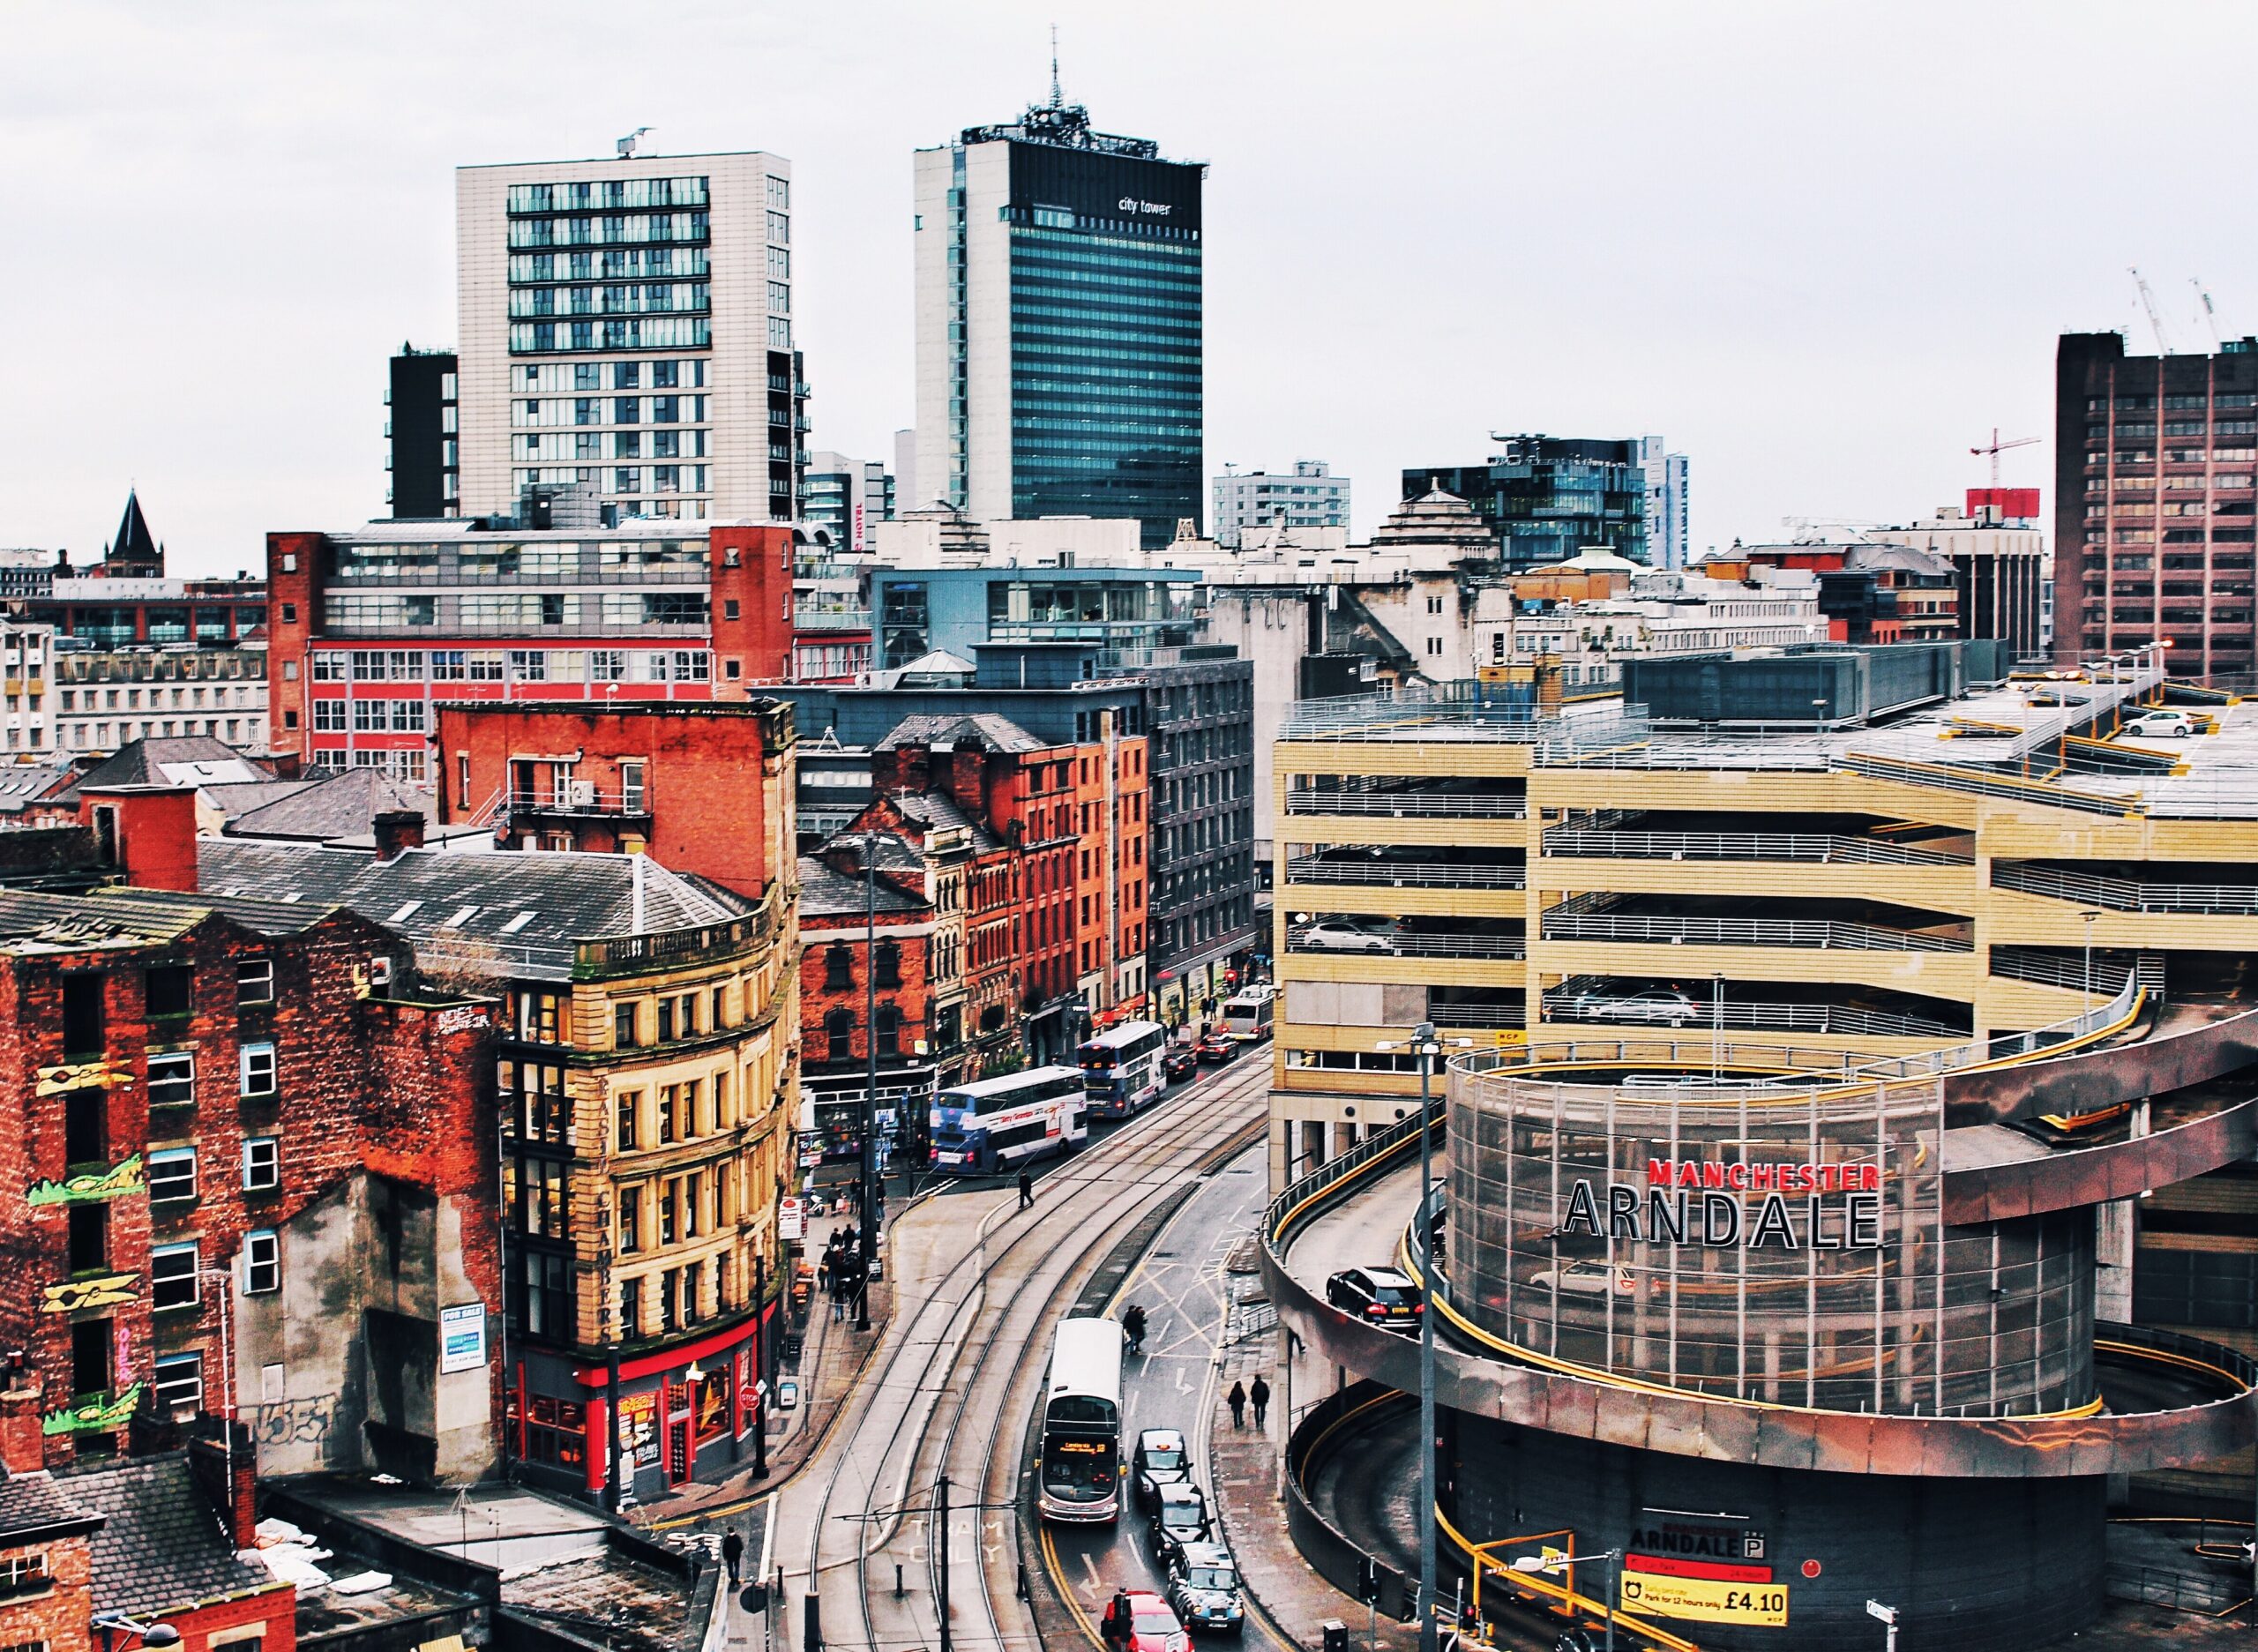 A view of Manchester, UK on an overcast day